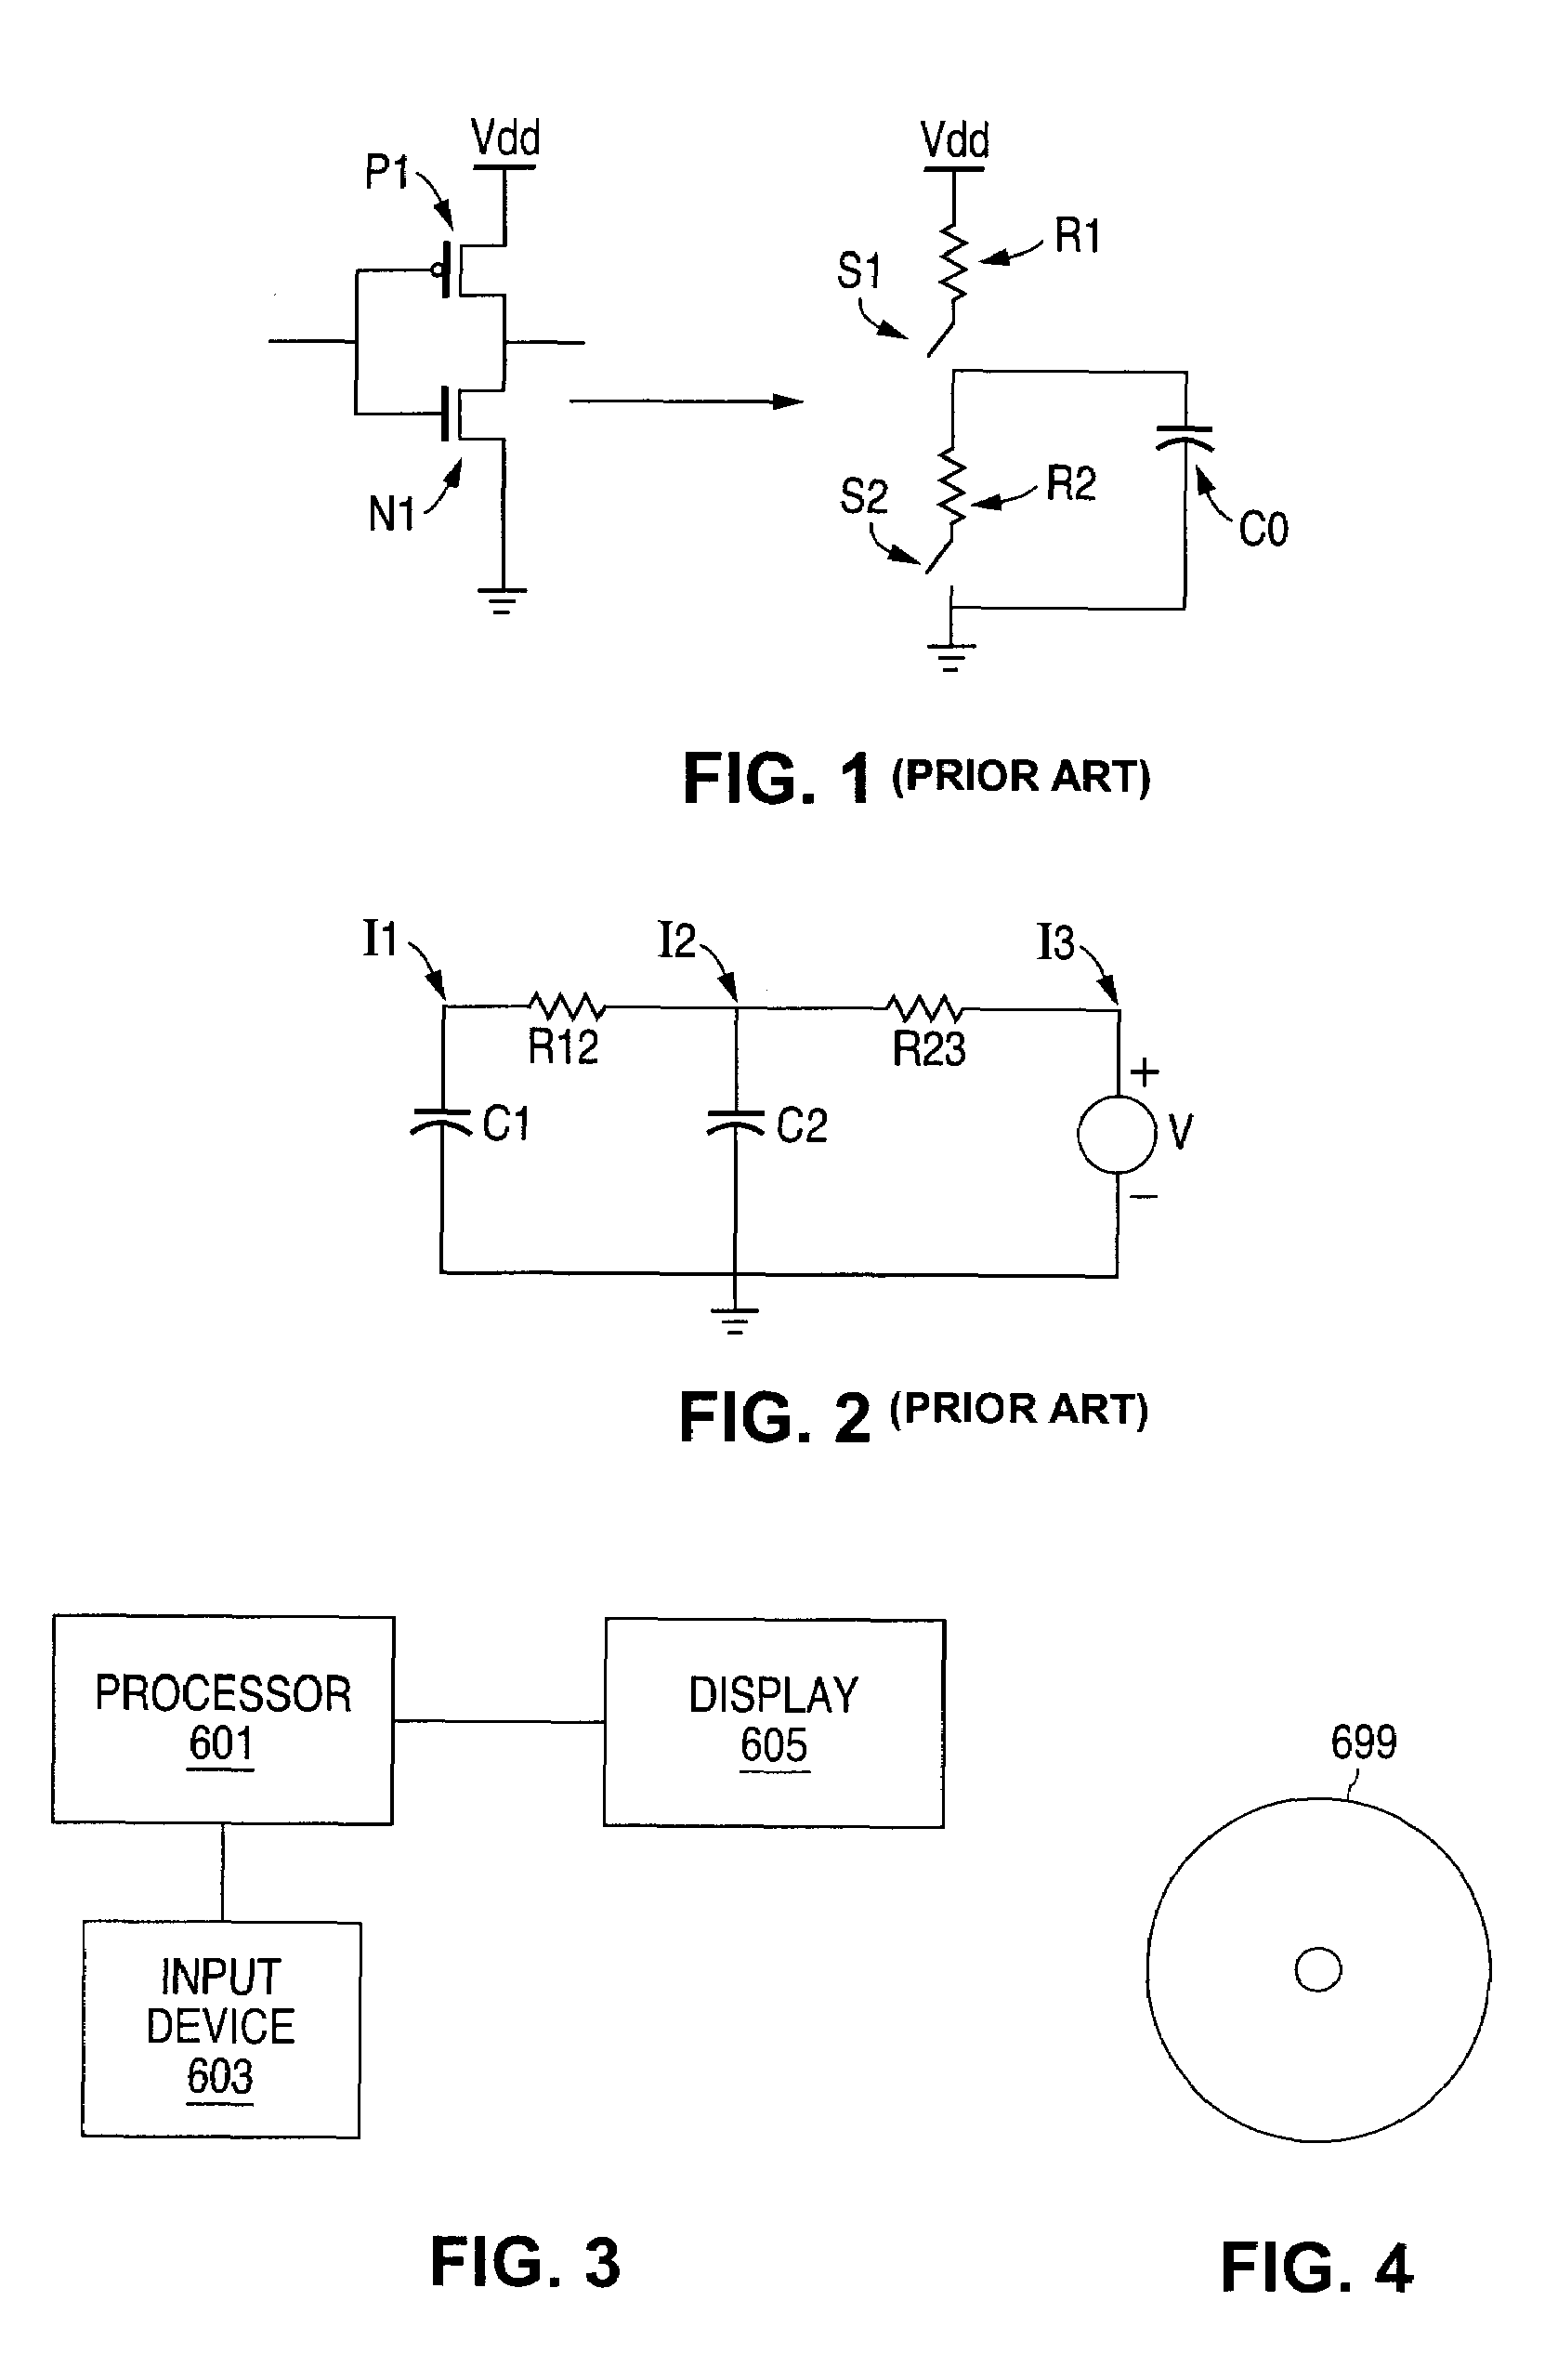 Method and system for device level simulation of large semiconductor memories and other circuits